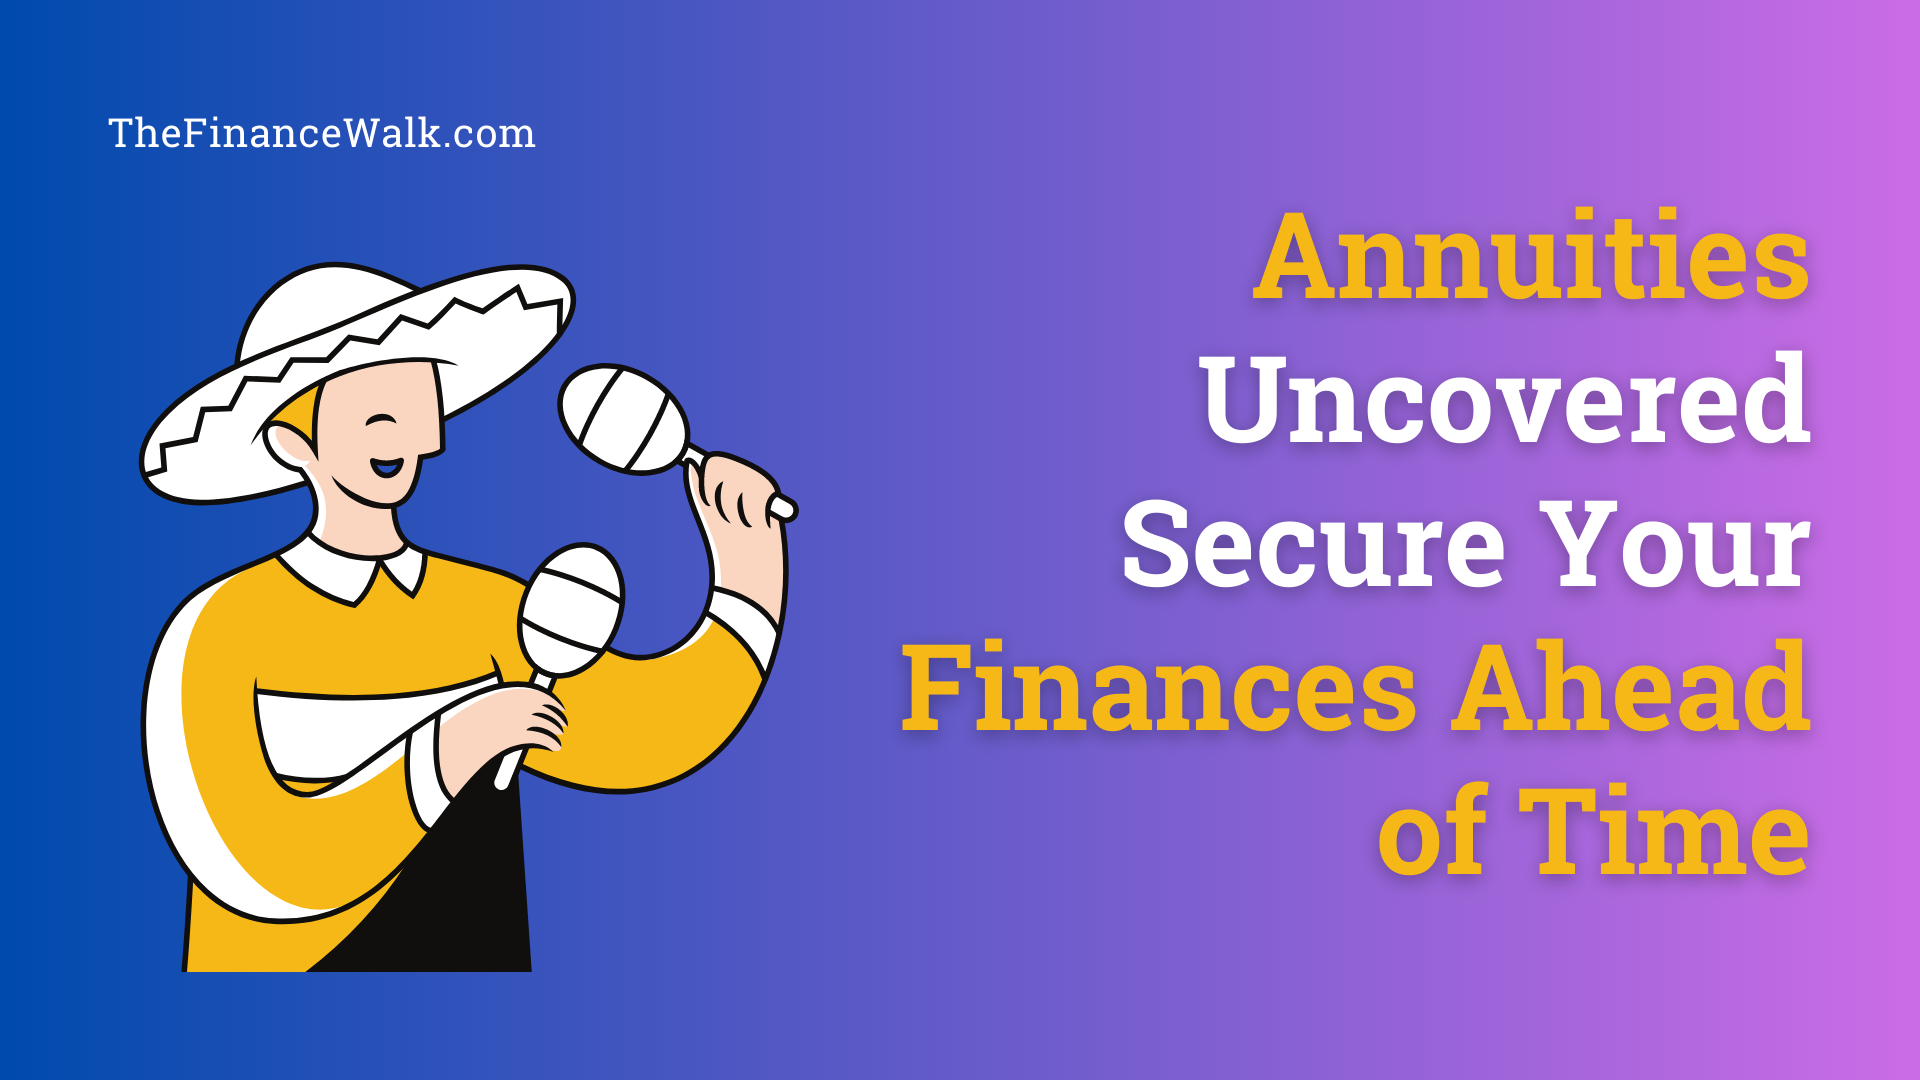 Annuities Uncovered Secure Your Finances Ahead of Time